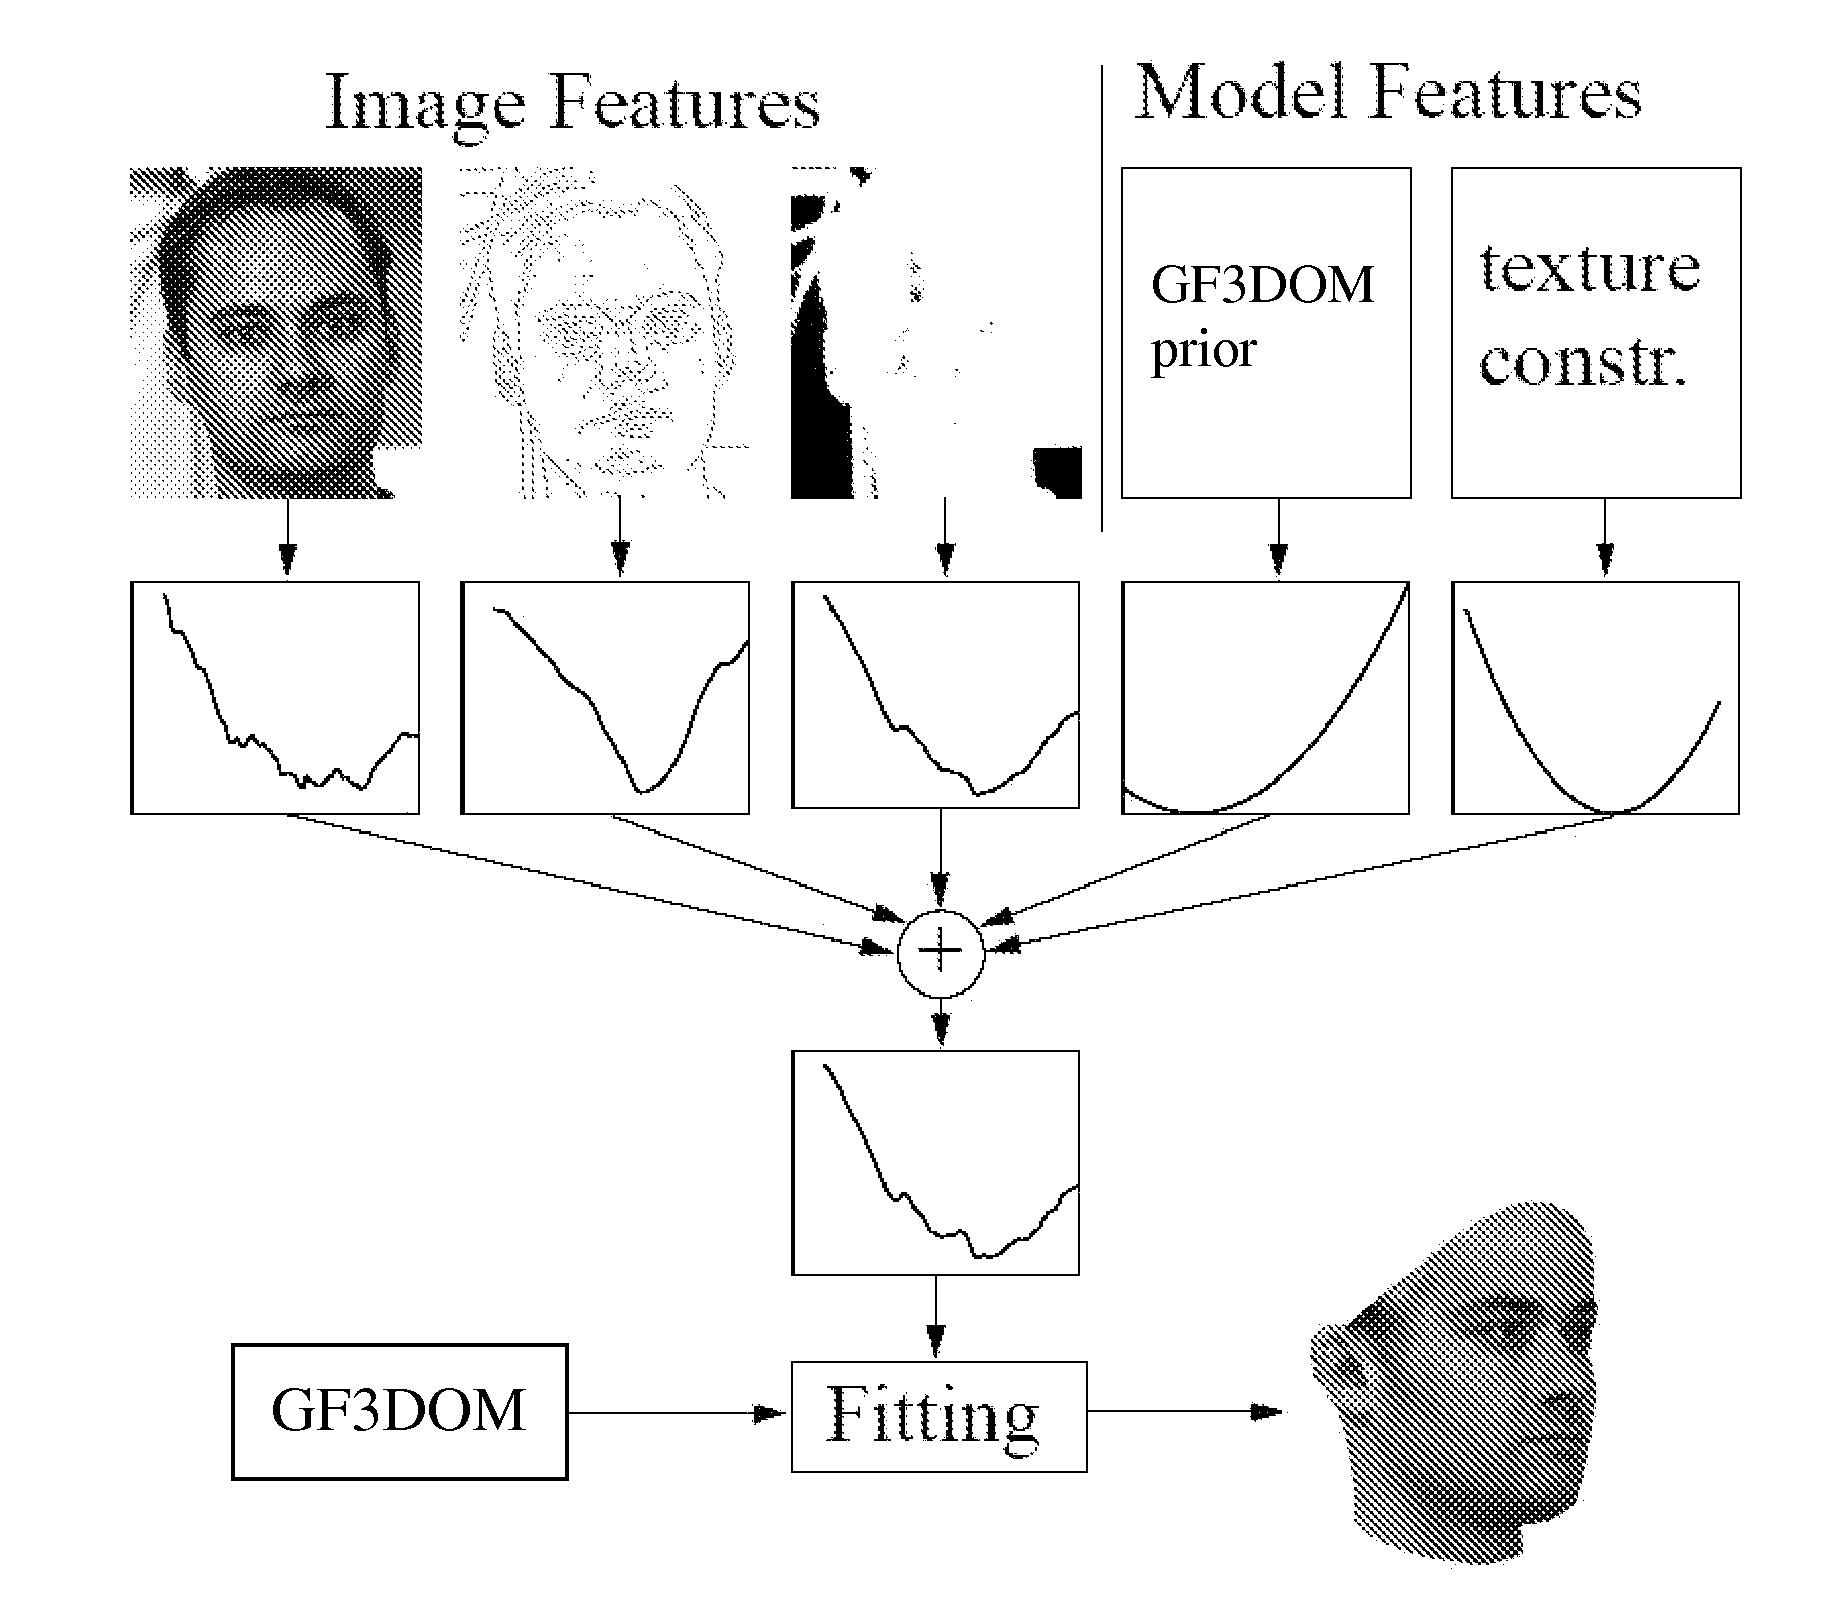 Estimating 3D shape and texture of a 3D object based on a 2D image of the 3D object